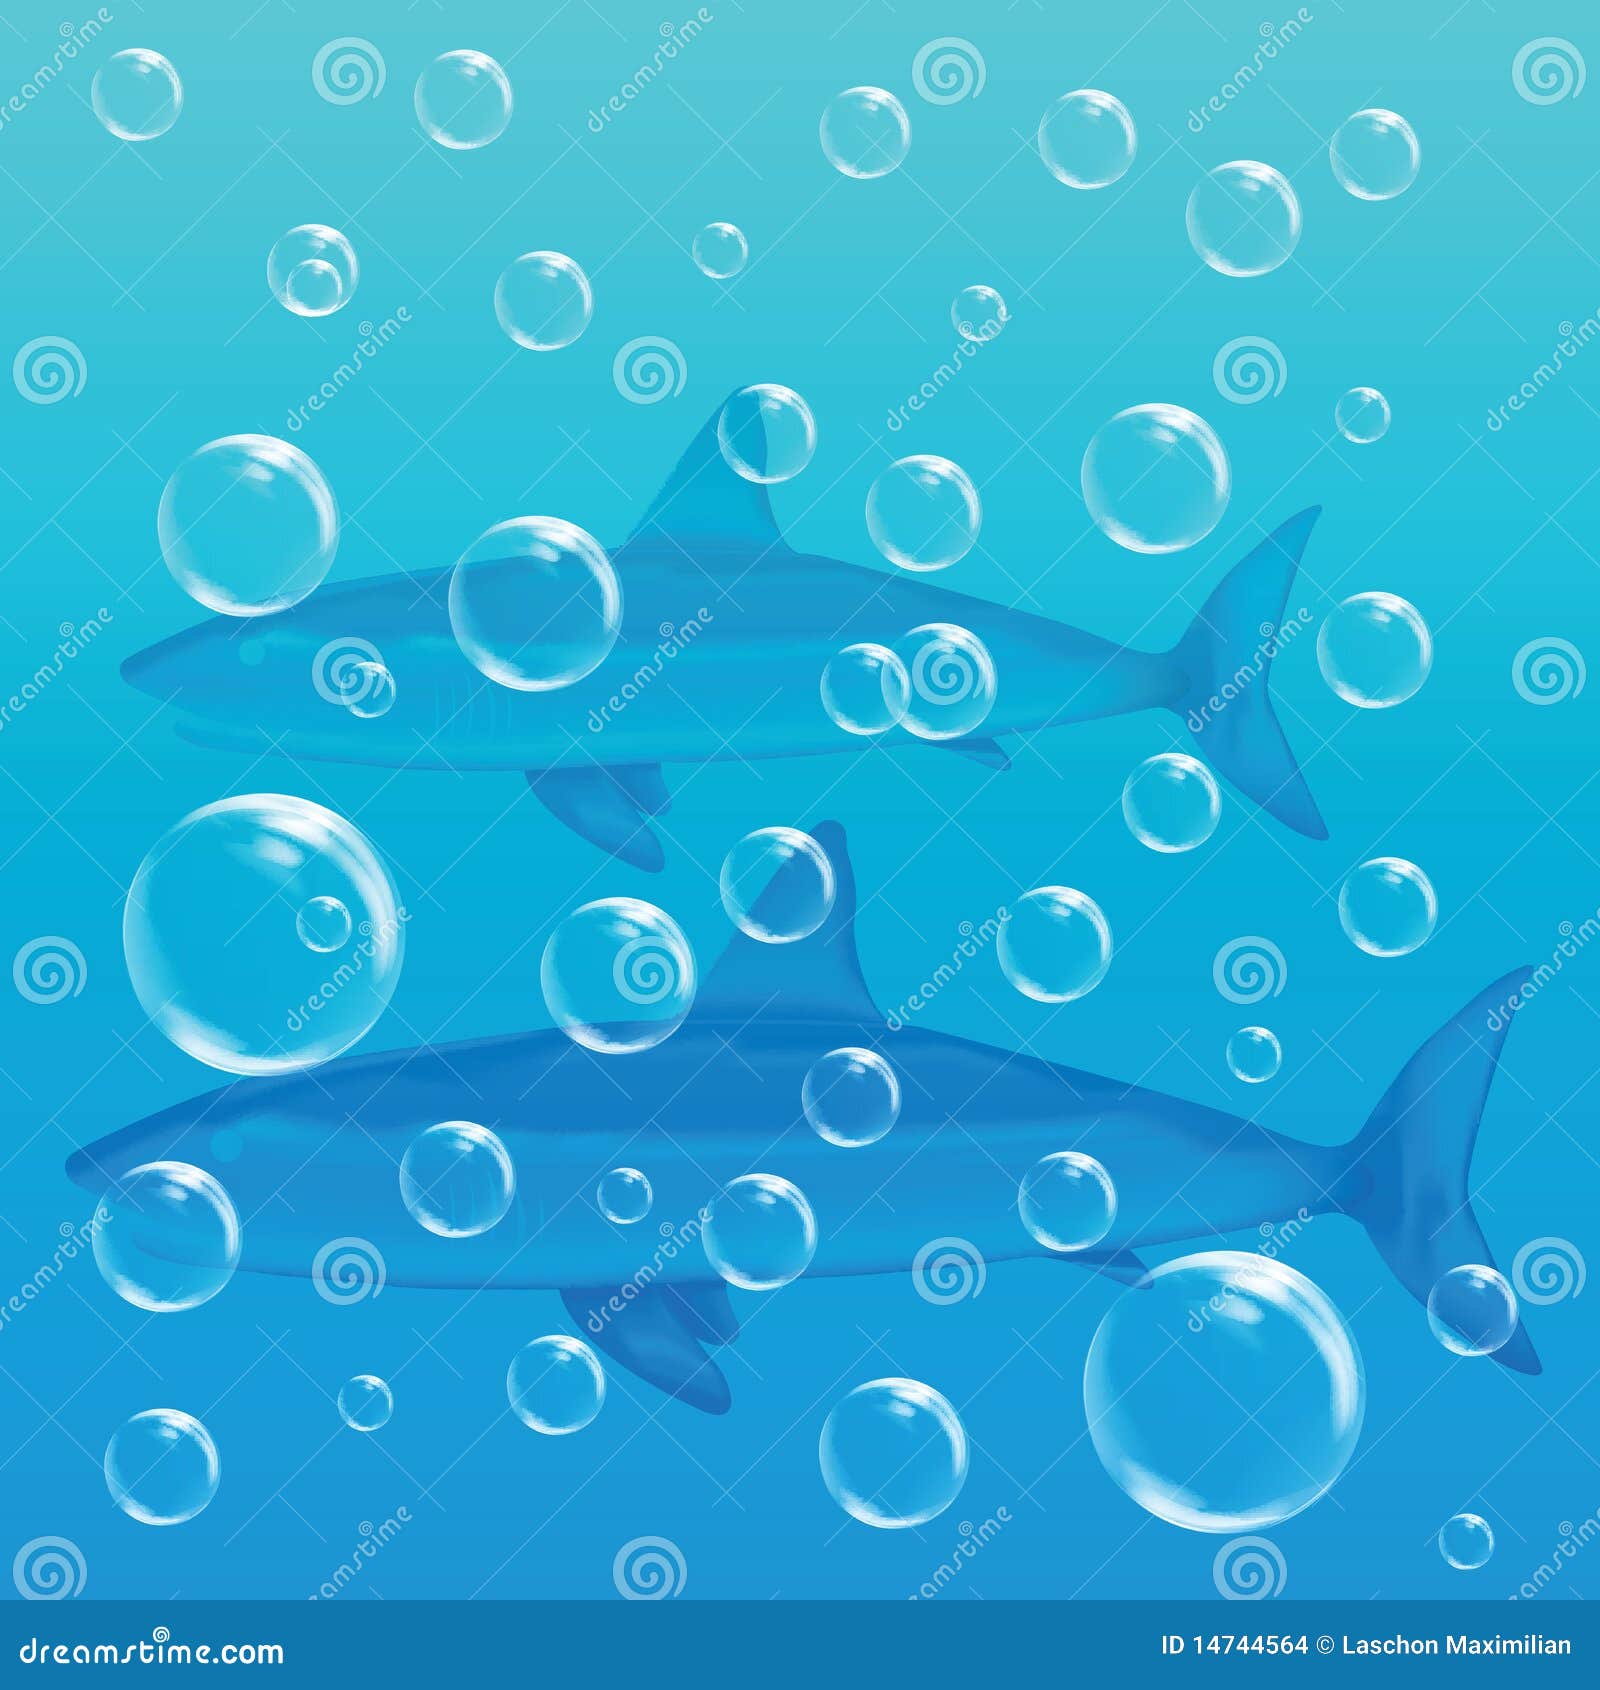 underwater clipart images - photo #41